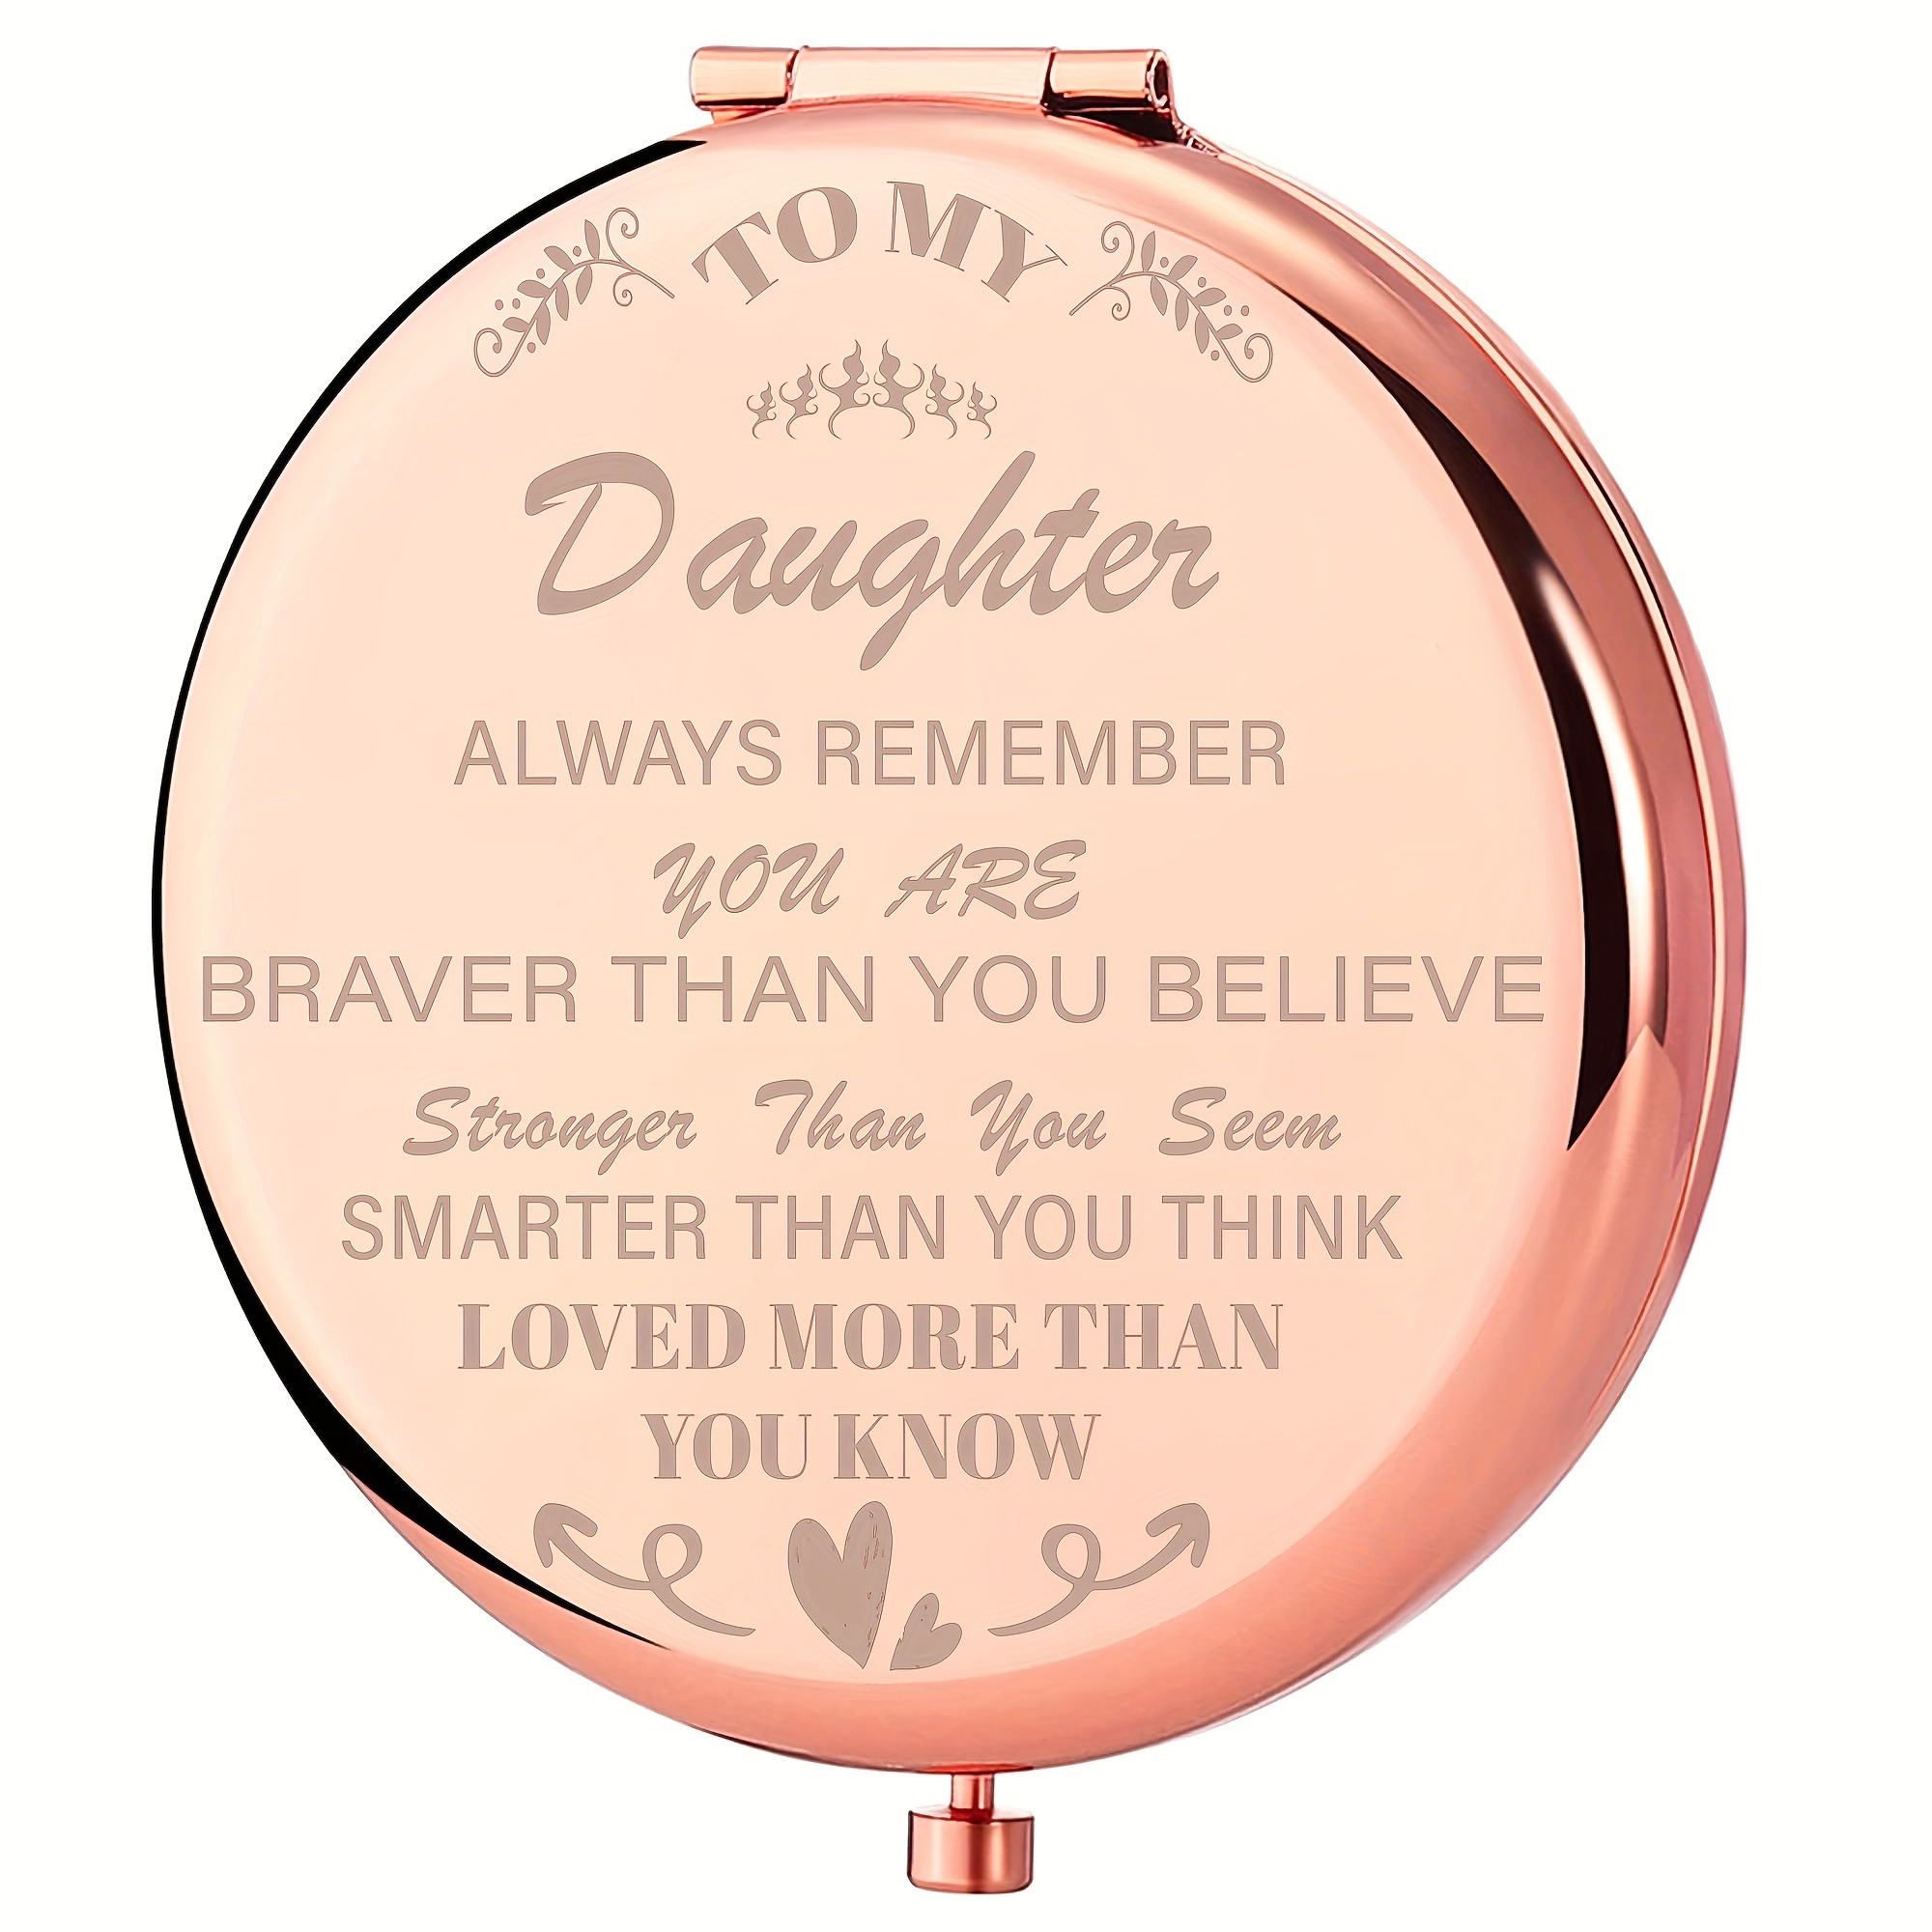 12 Year Old Birthday Gifts for Girls You are Braver Than You Believe Strong  Than You Seem Inspirational Unique 12th Birthday Gift Ideas for Teen Girl  Makeup Compact Mirror for Daughter Sister